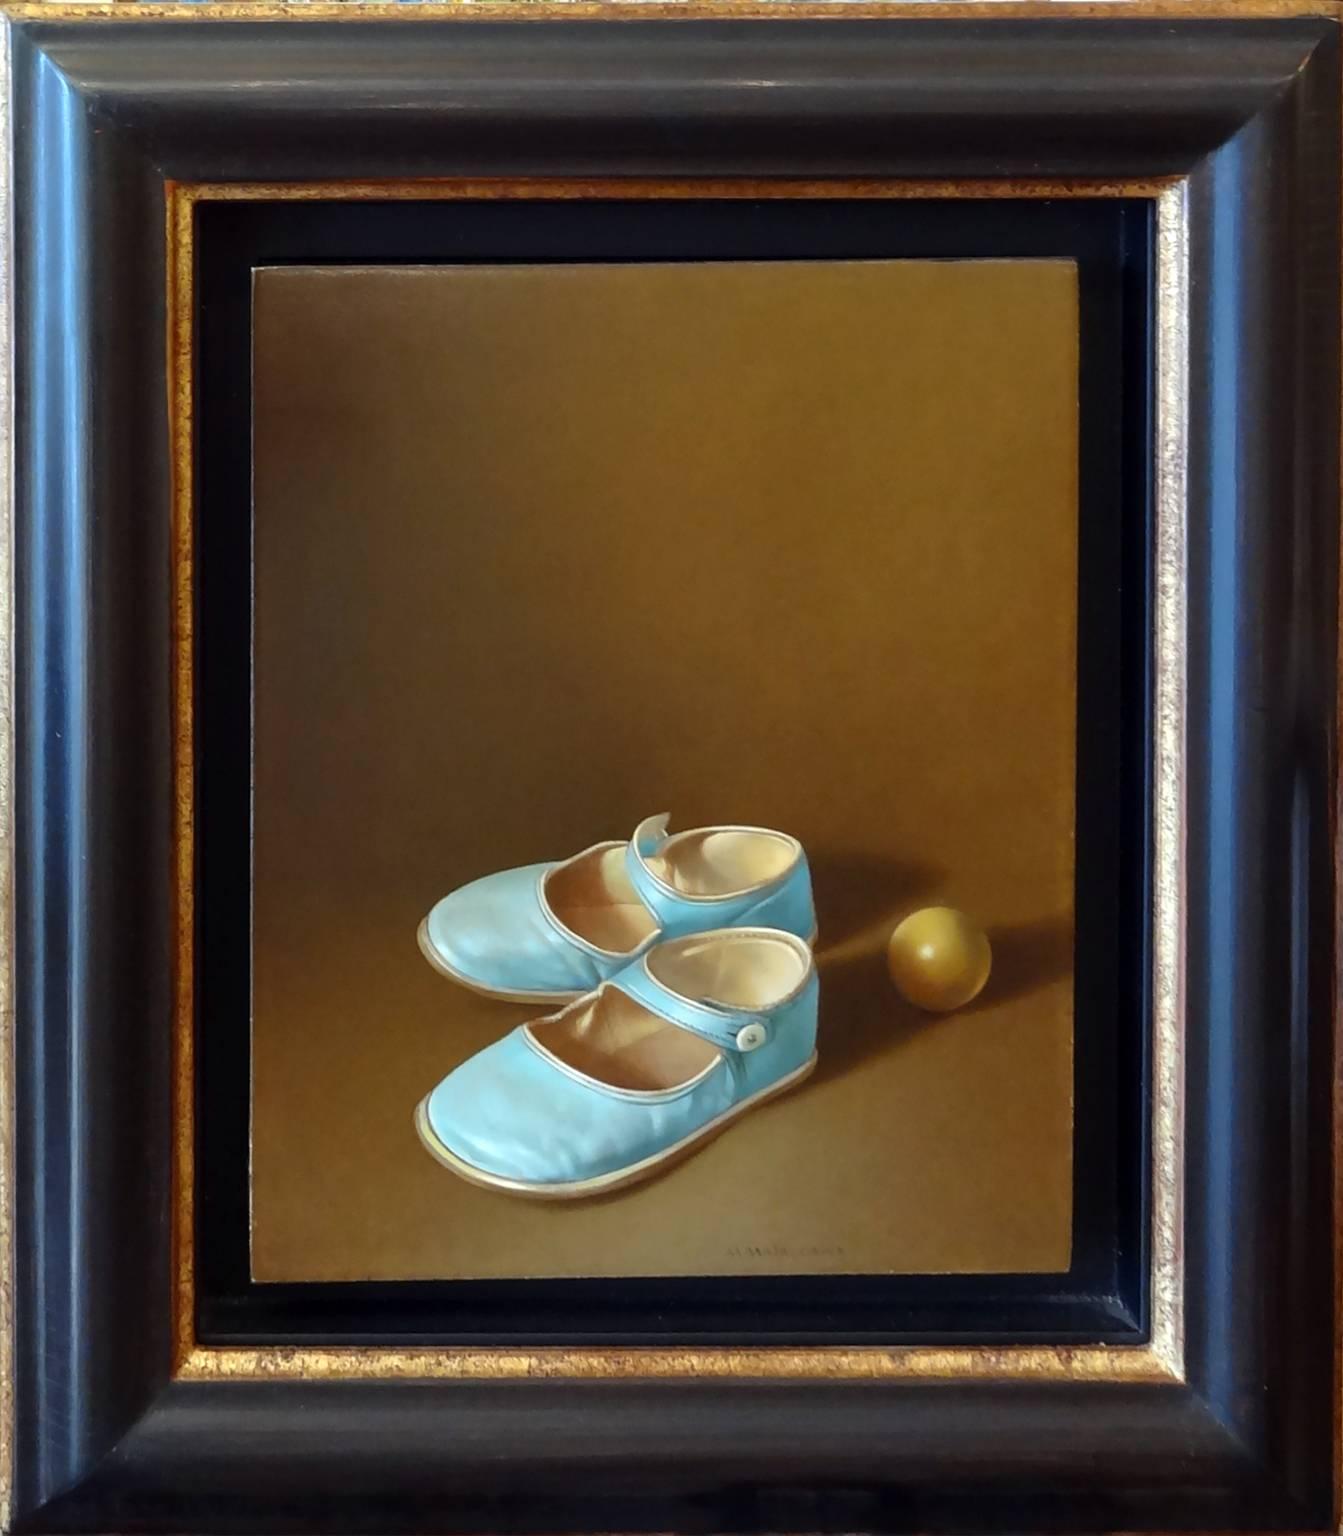 Turquoise Shoes II (Chaussures Turquoise II) - Painting by Antonio Matallana